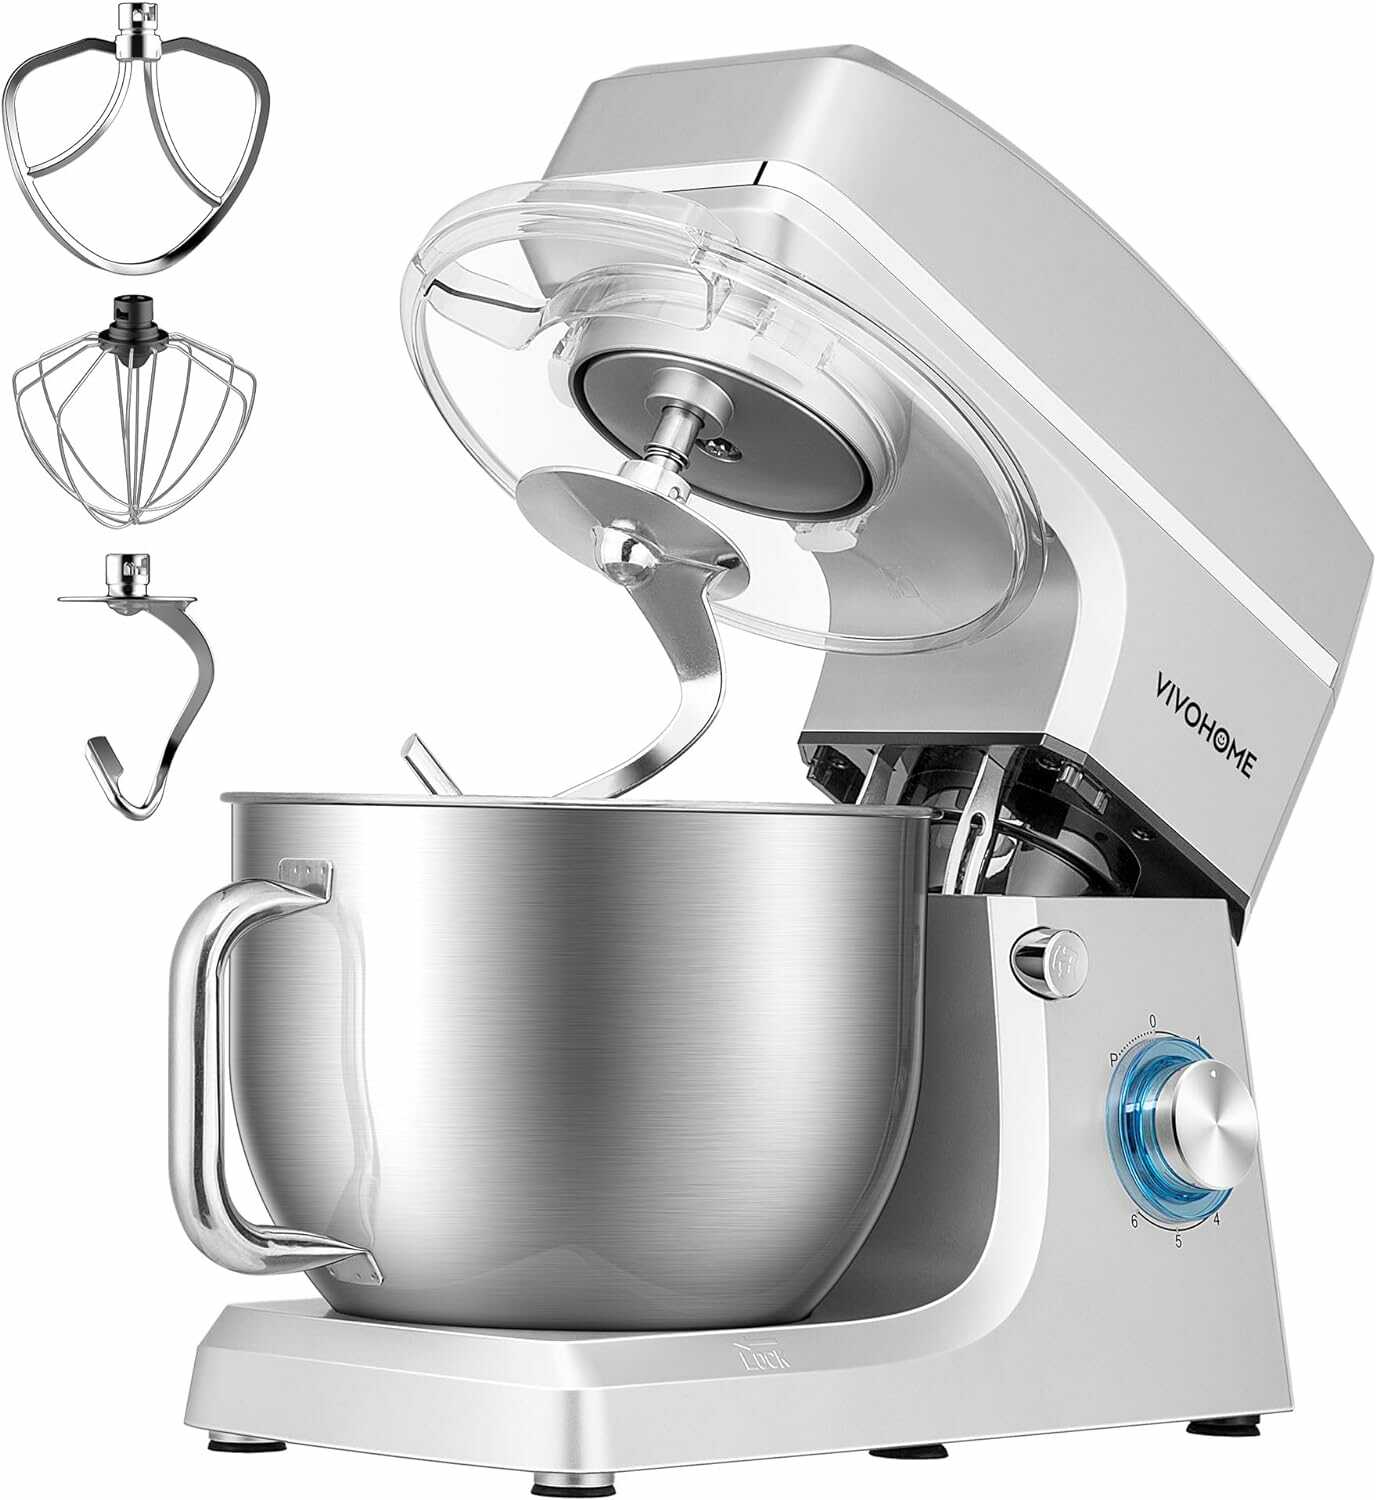 VIVOHOME 7.5 Quart Stand Mixer, 660W 6-Speed Electric Food Mixer, Gray 